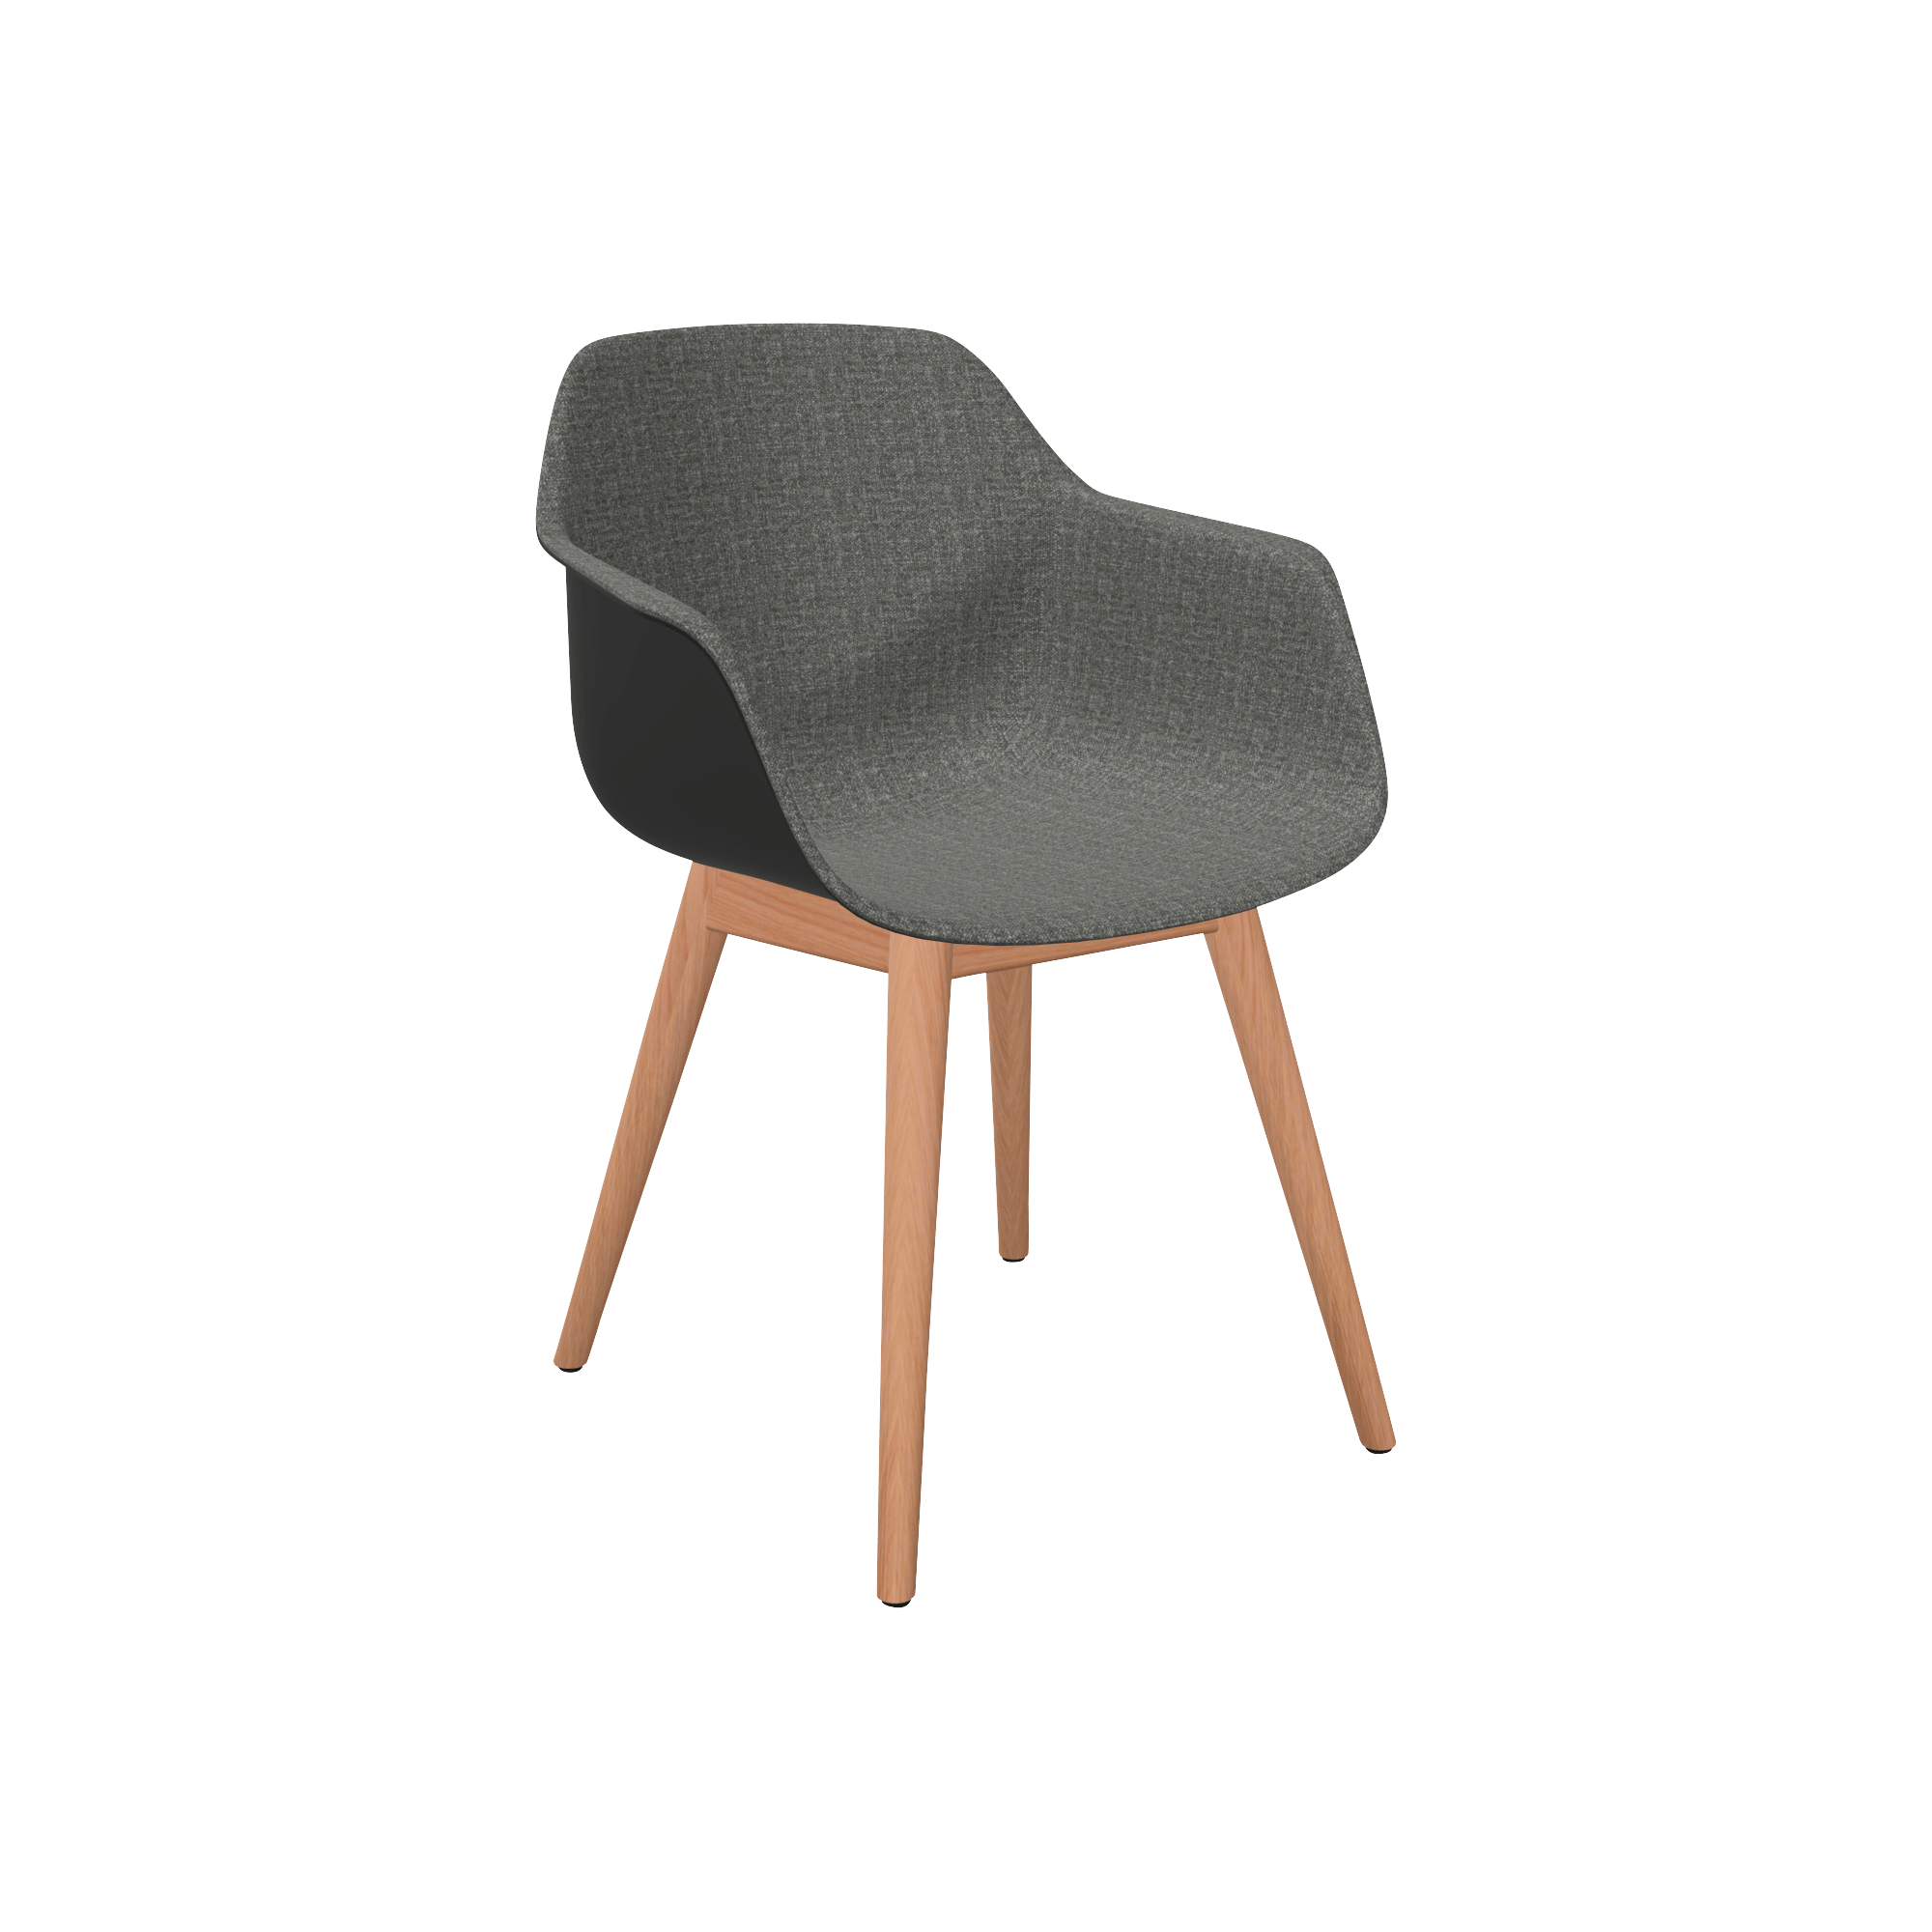 A chair with a grey fabric and wooden legs.